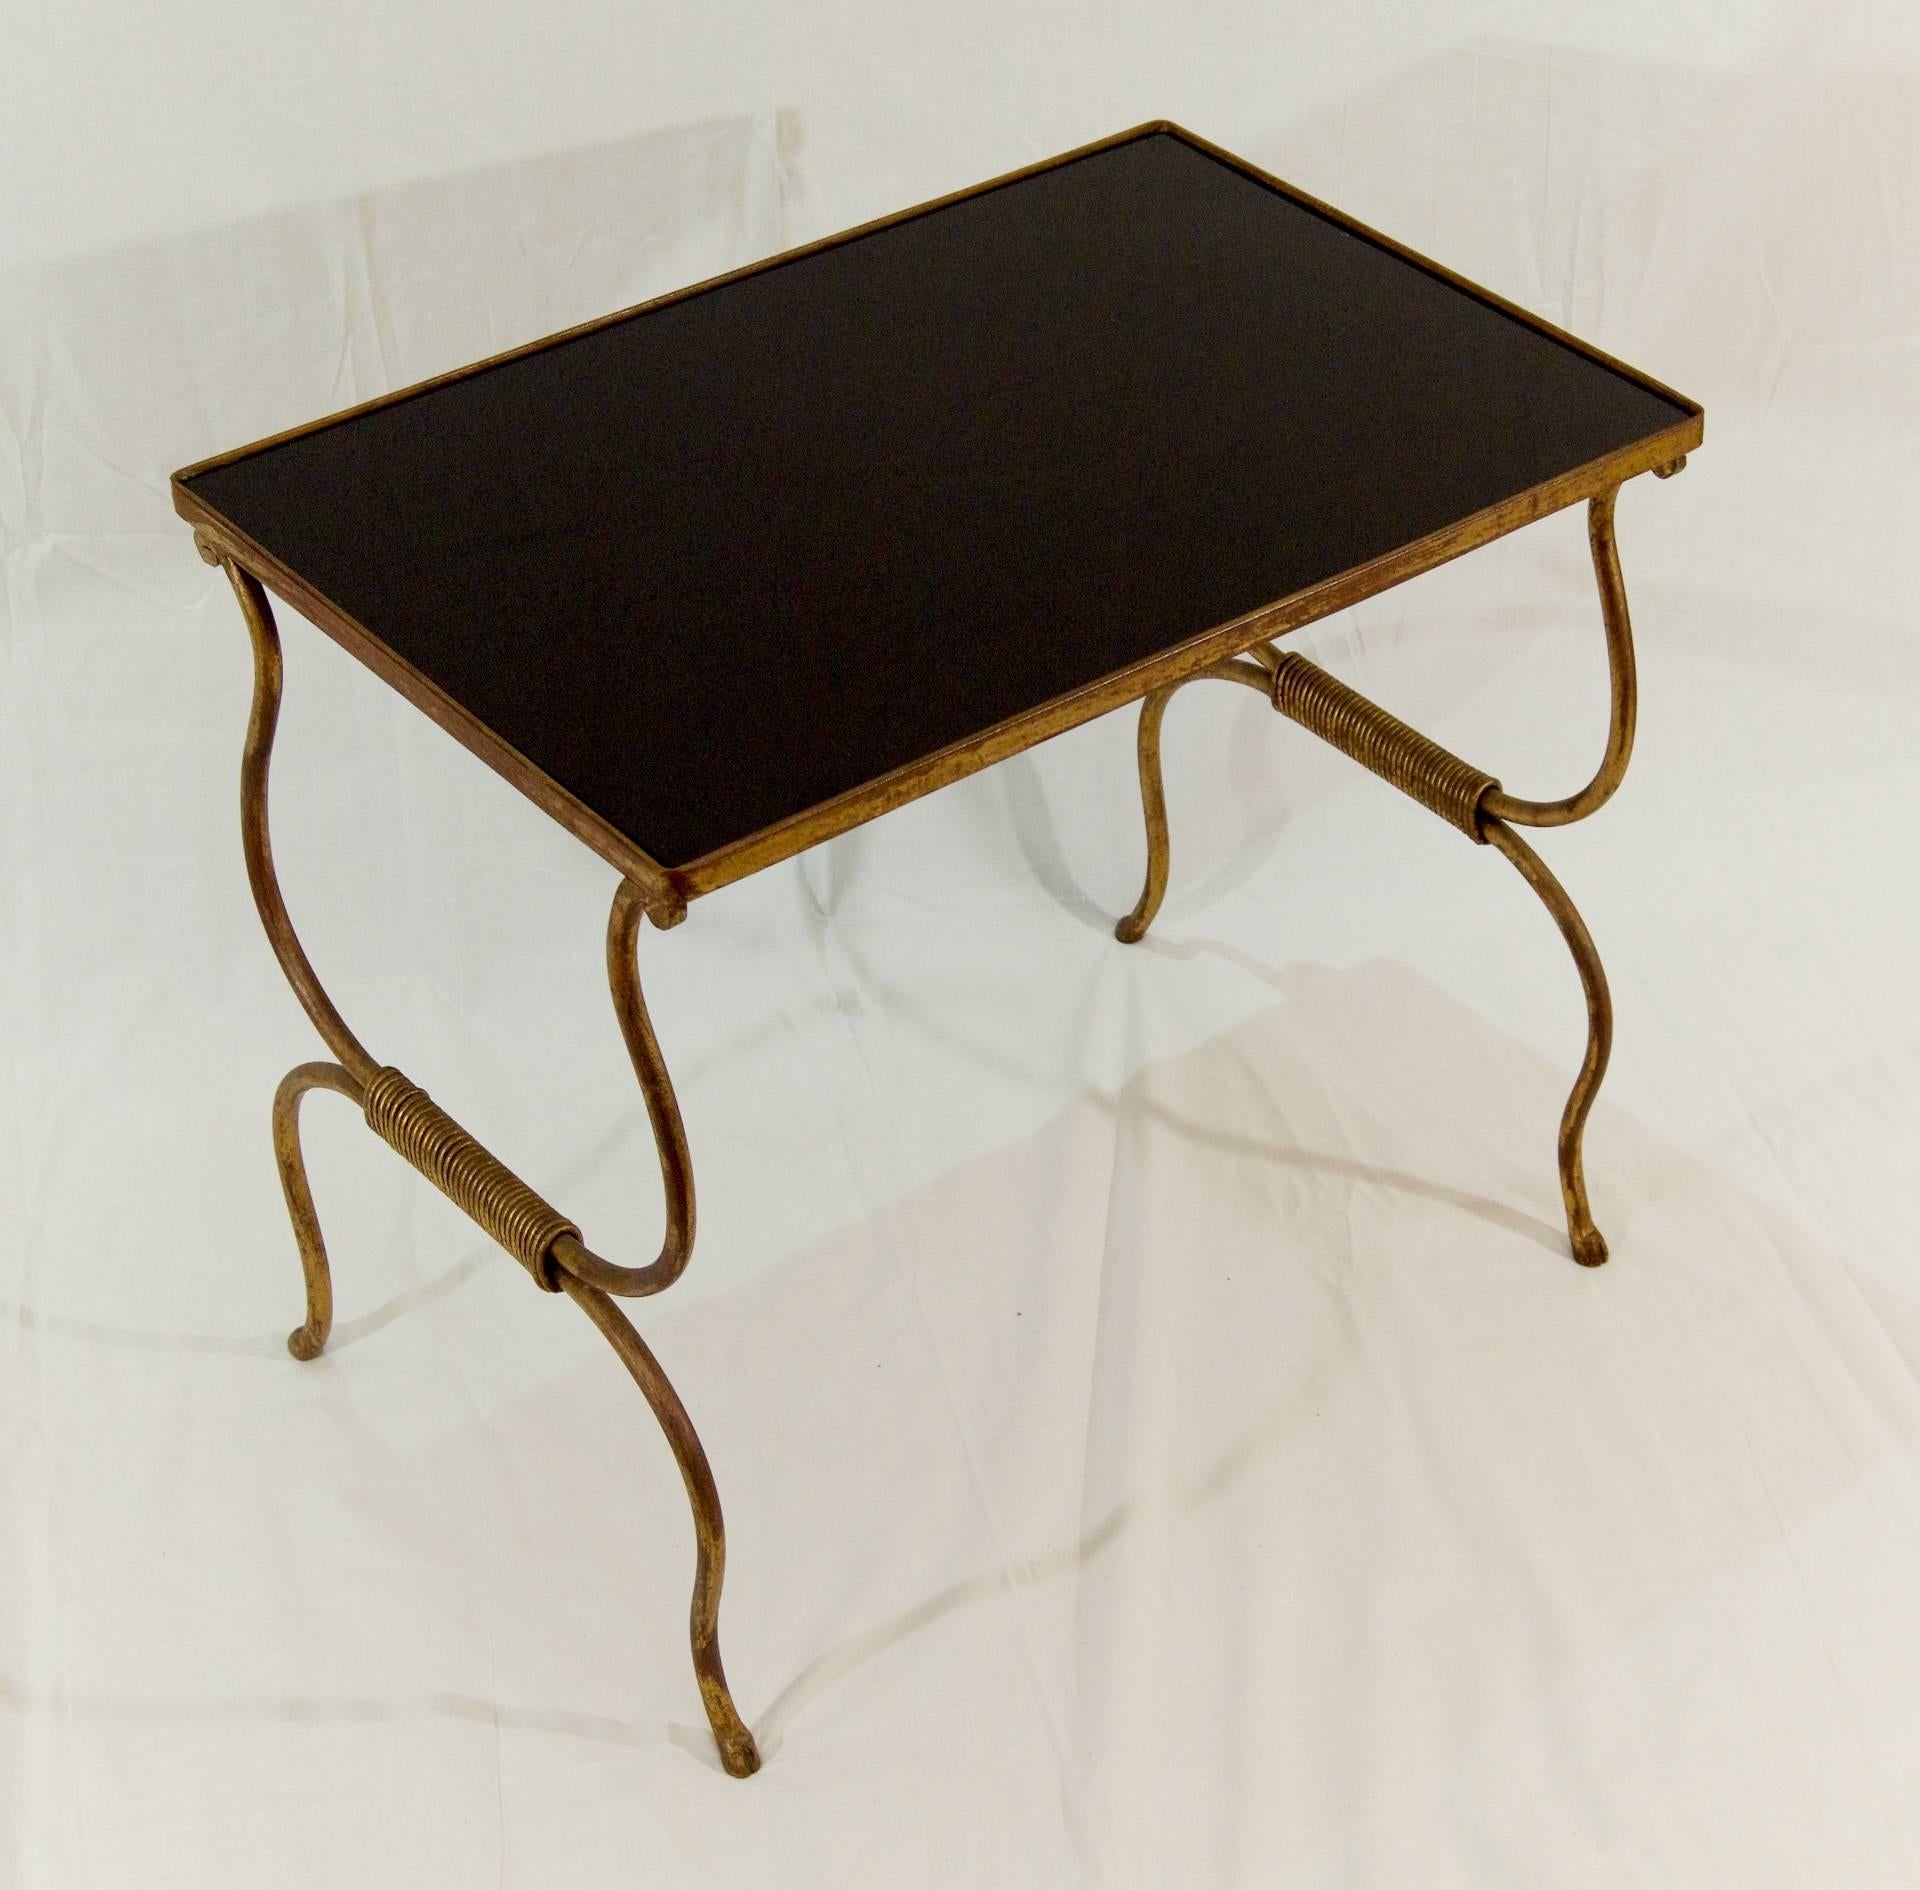 A gilt painted wrought iron table with nicely formed hoofs at the end of each leg. The top is black glass.